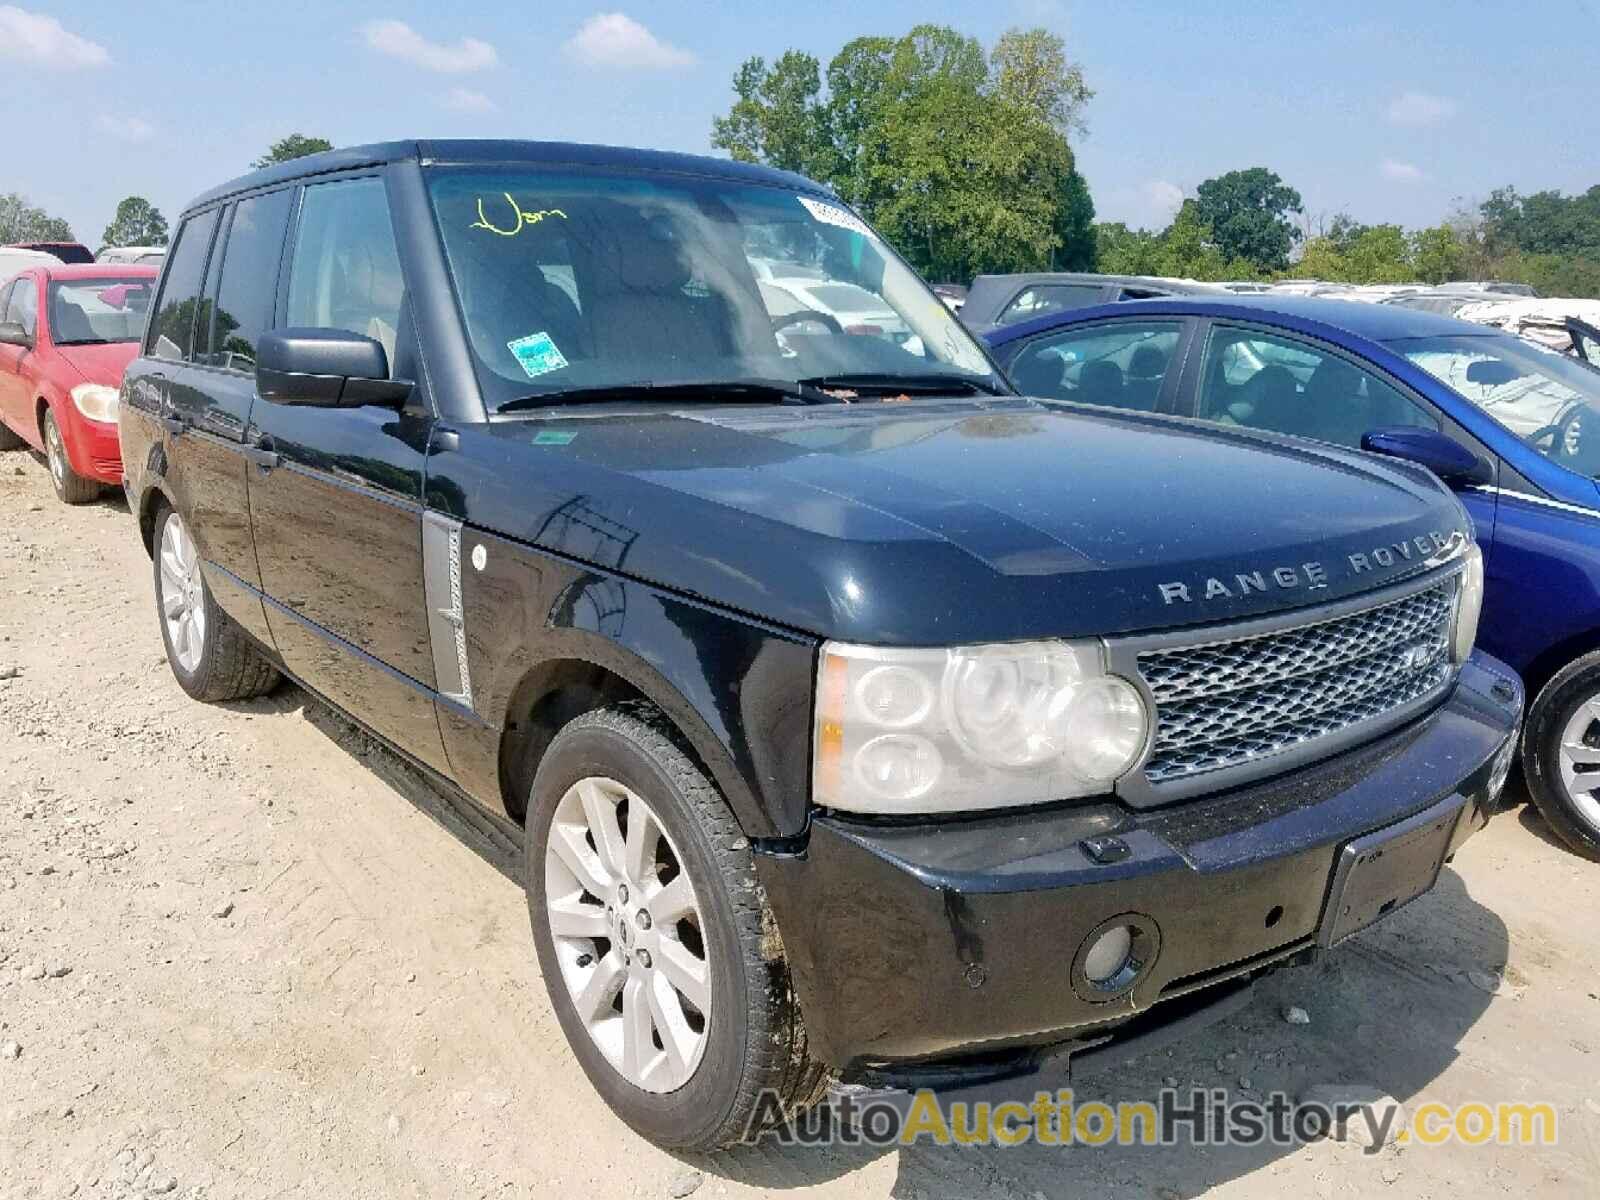 2006 LAND ROVER RANGE ROVE SUPERCHARGED, SALMF13426A226458